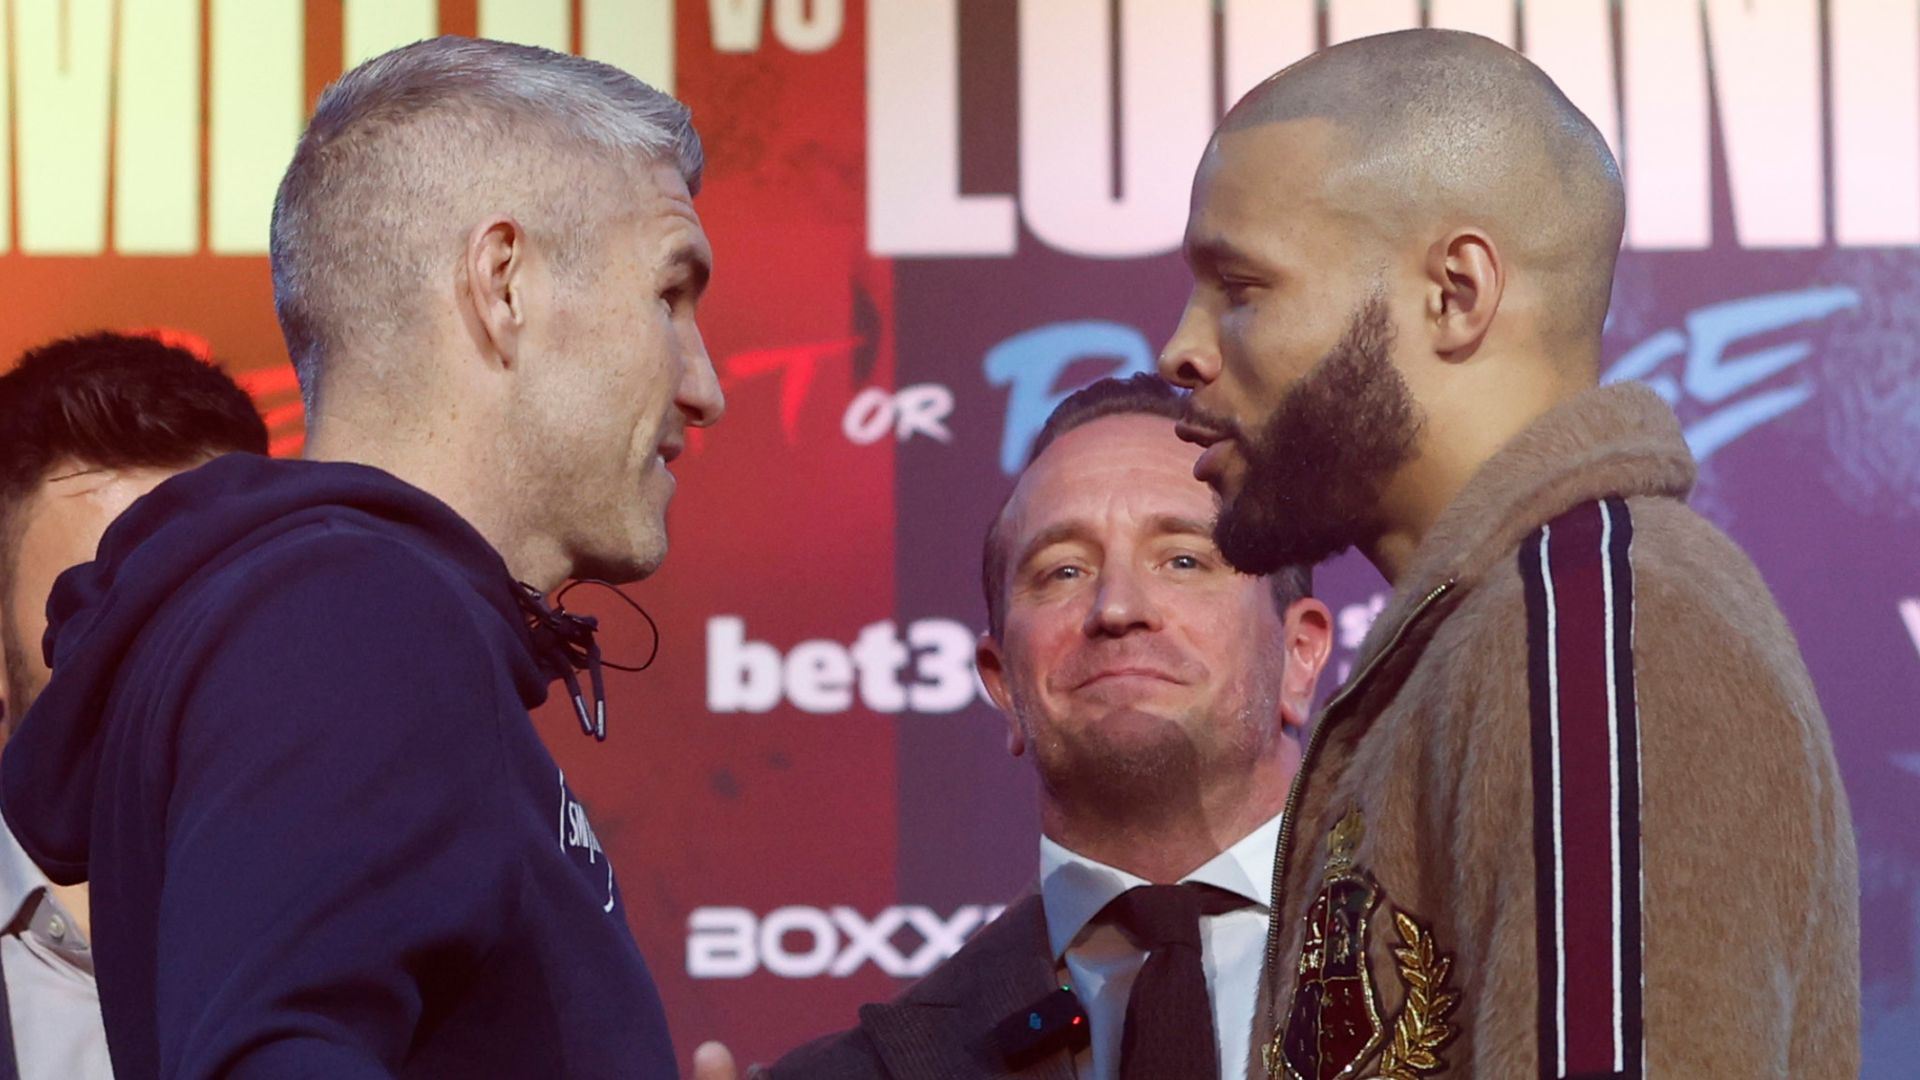 Smith vs Eubank II: What time are they in the ring?